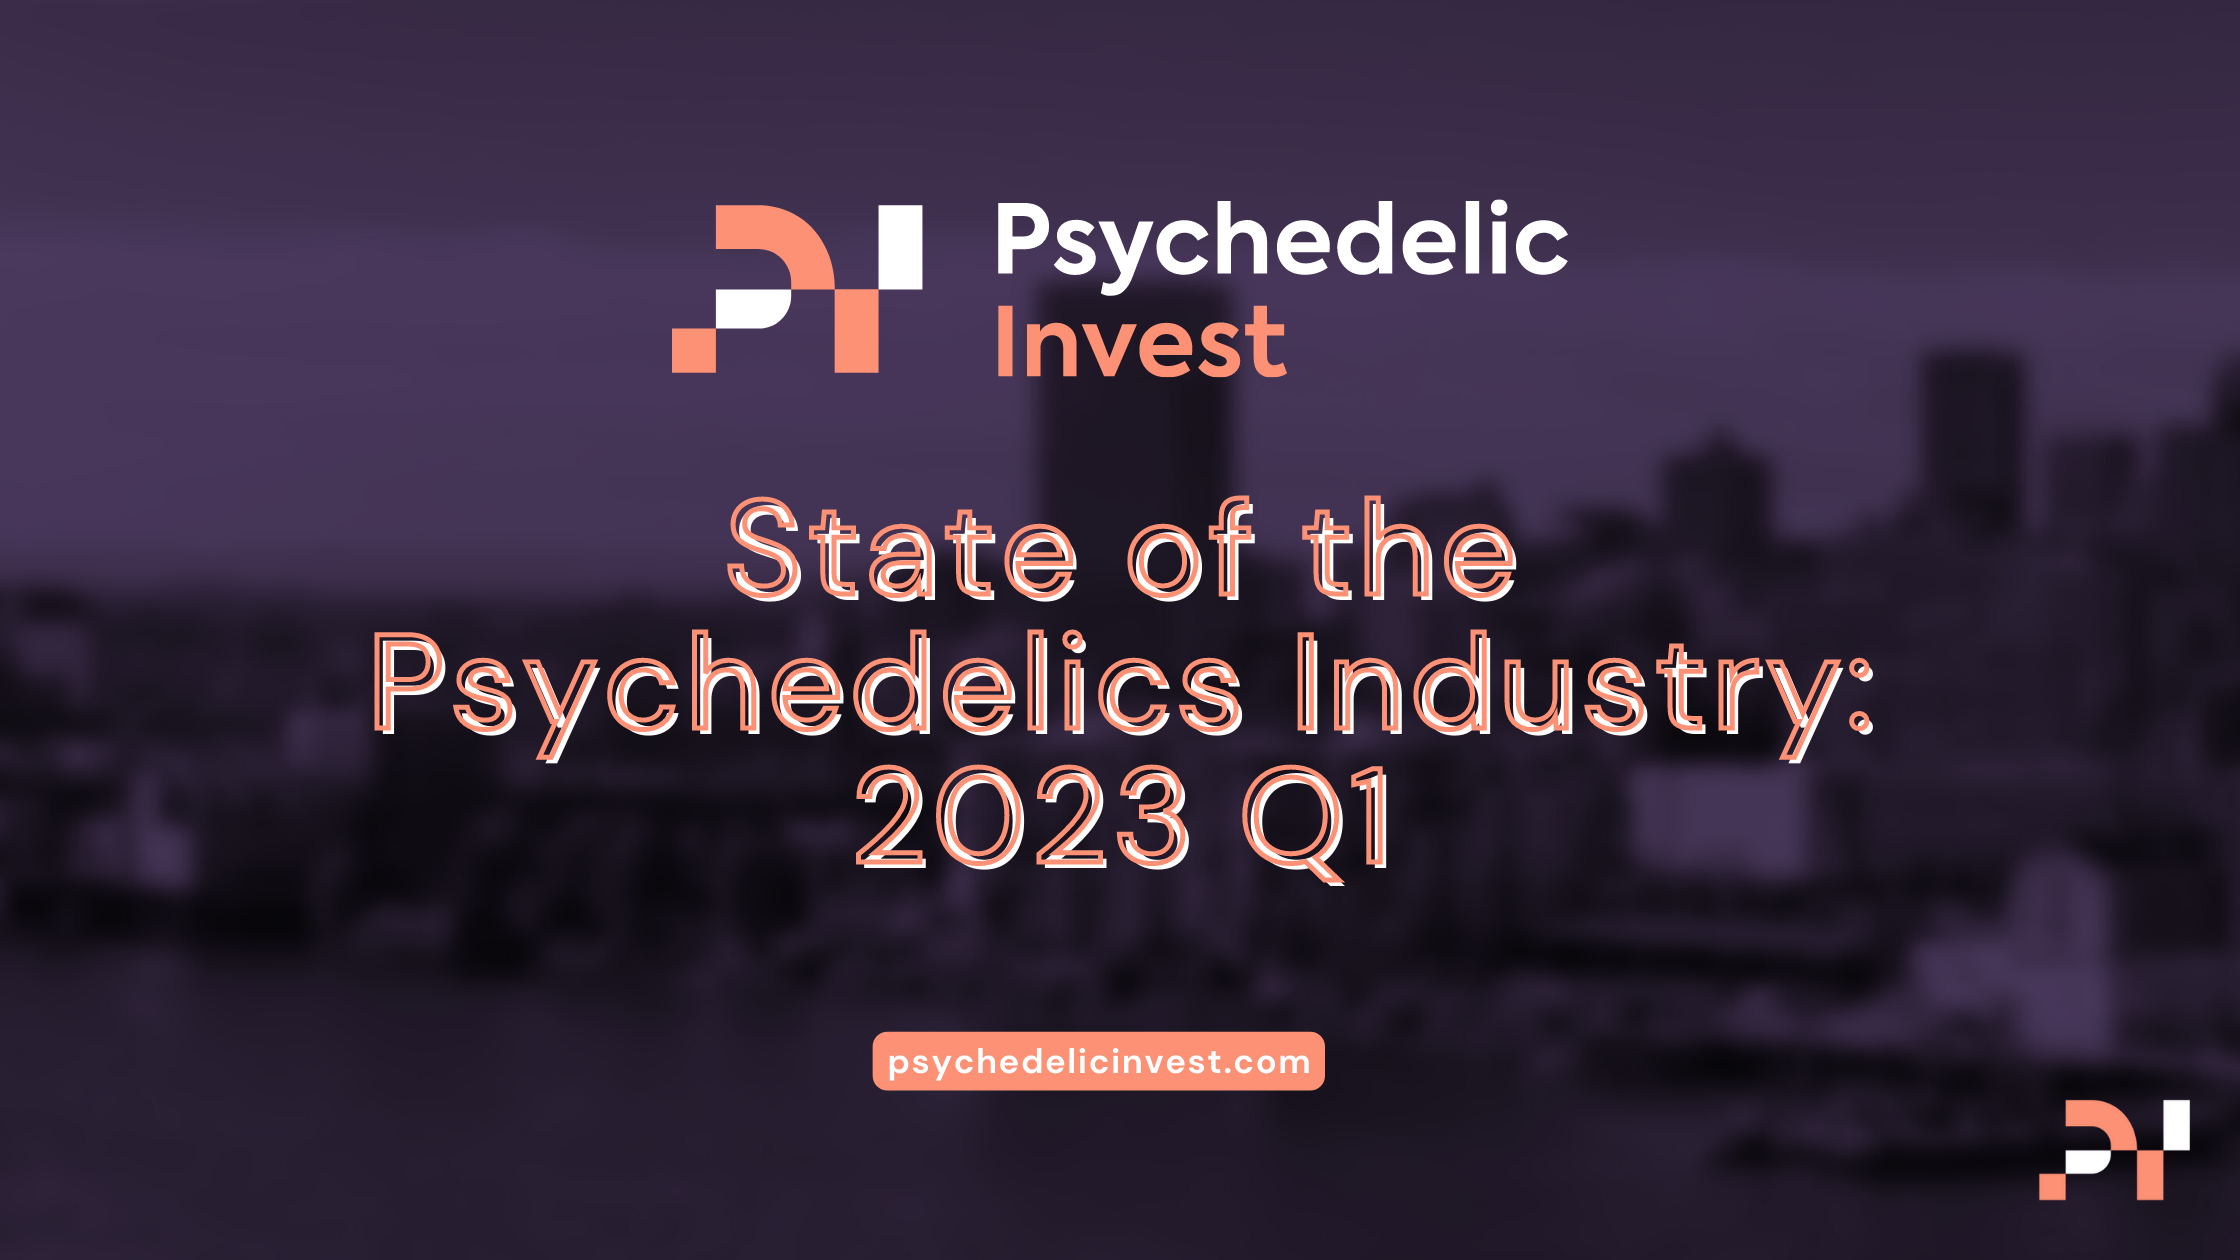 State of the Psychedelic Industry: 2023 Q1